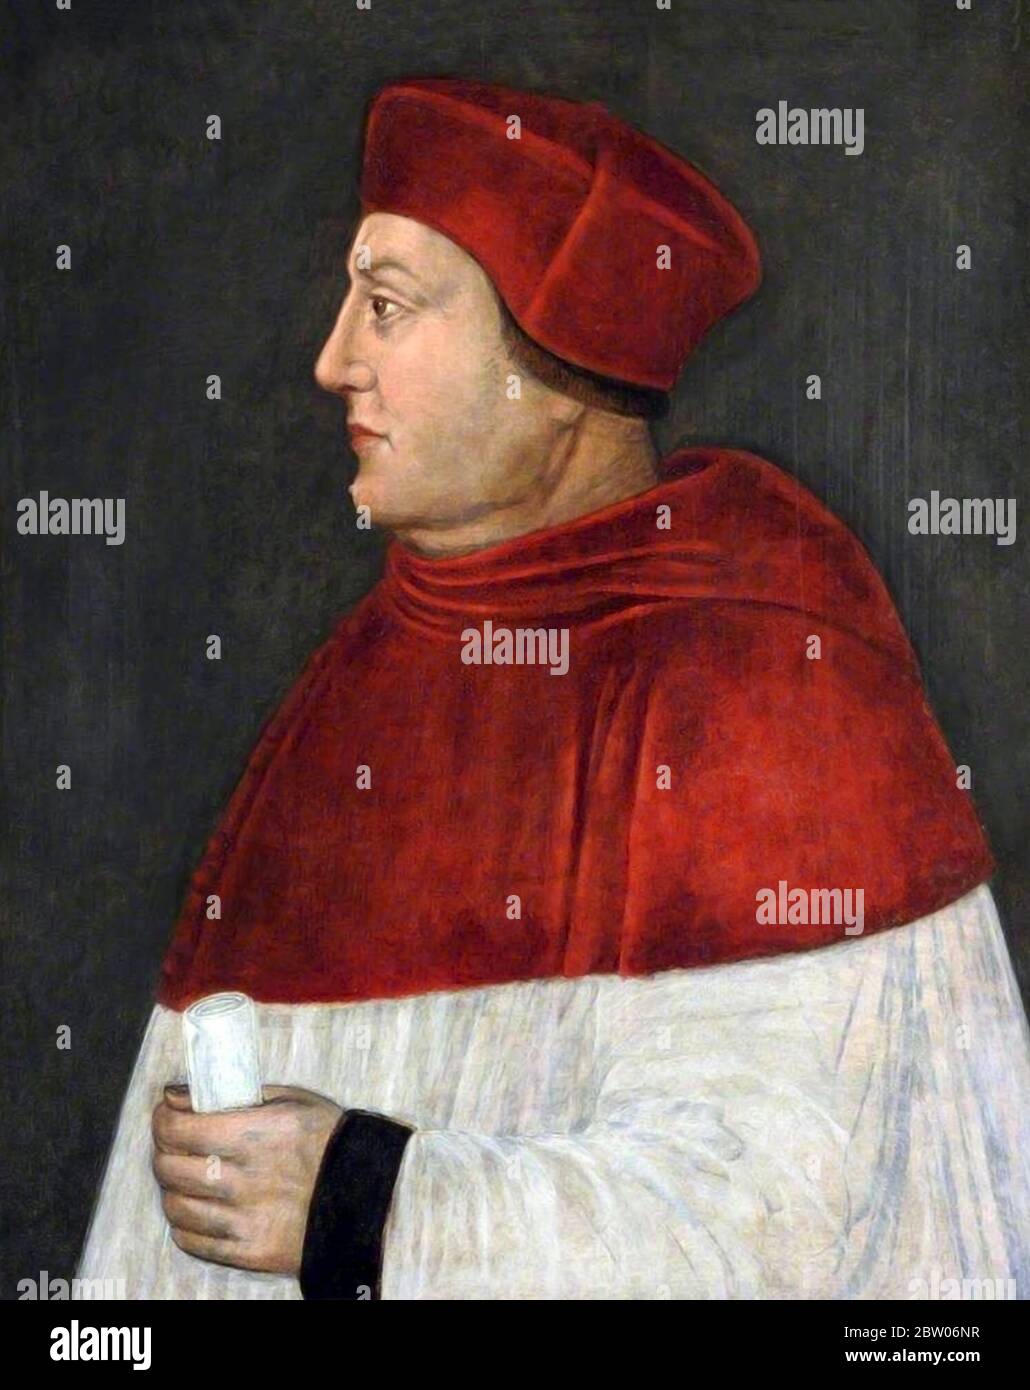 Thomas Wolsey. Portrait of Cardinal Wolsey (c.1473-1530) by unknown artist, oil on panel, c.1585-96 Stock Photo